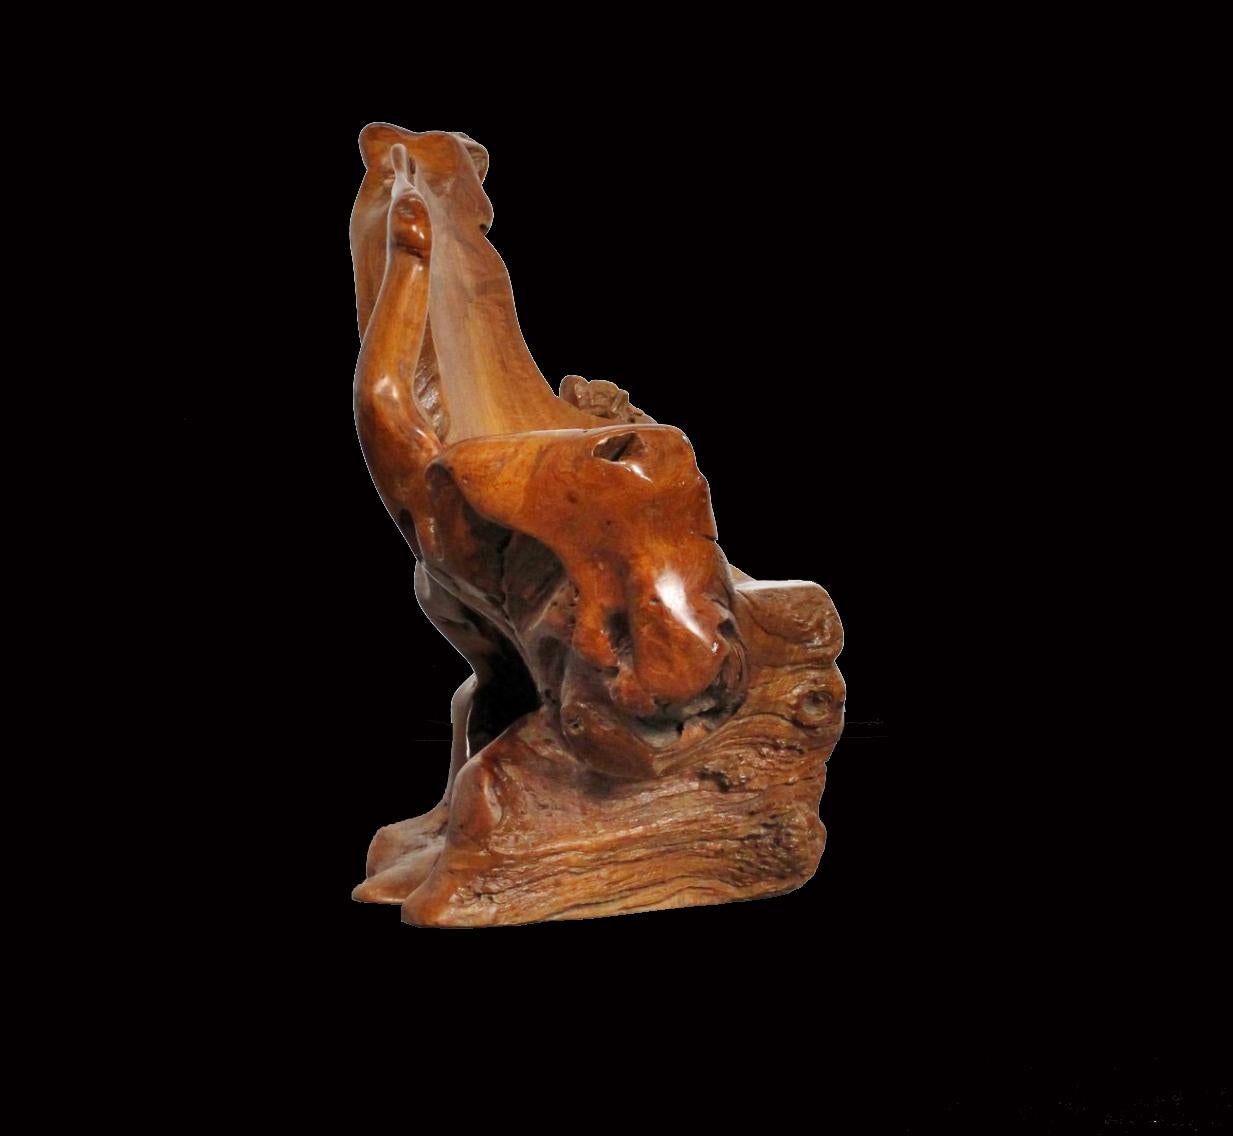 This large tree root which has been carved and polished to retain it's natural form, but to allow for a seat.
Because it's natural form it is unique, although there may be other similar pieces, none will be exactly like this one!